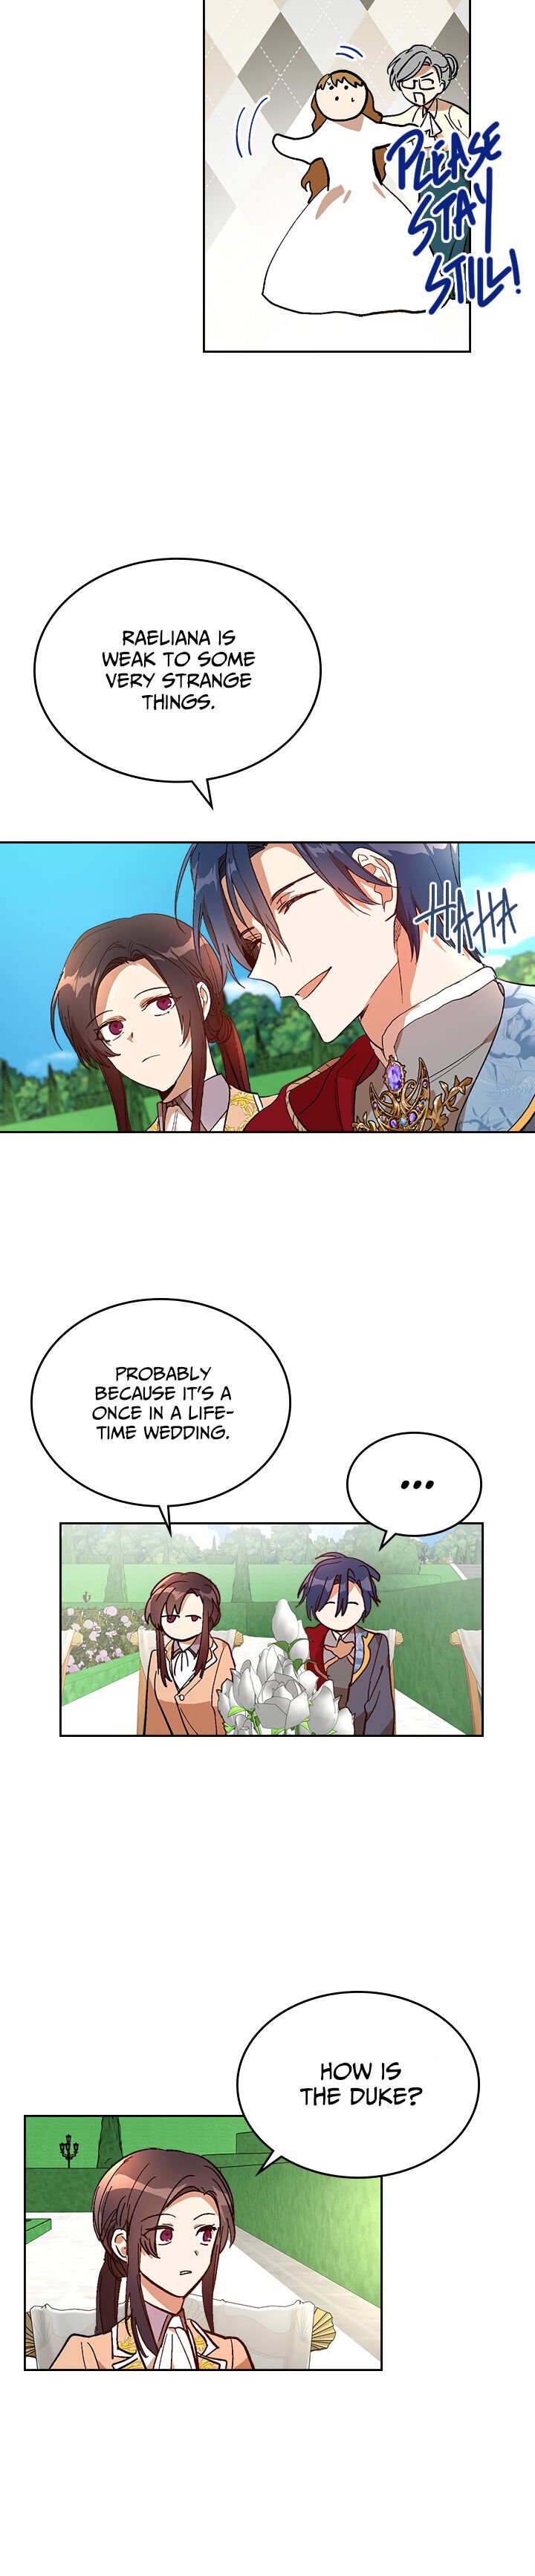 The Reason Why Raeliana Ended up at the Duke’s Mansion Chapter 156 - Page 2